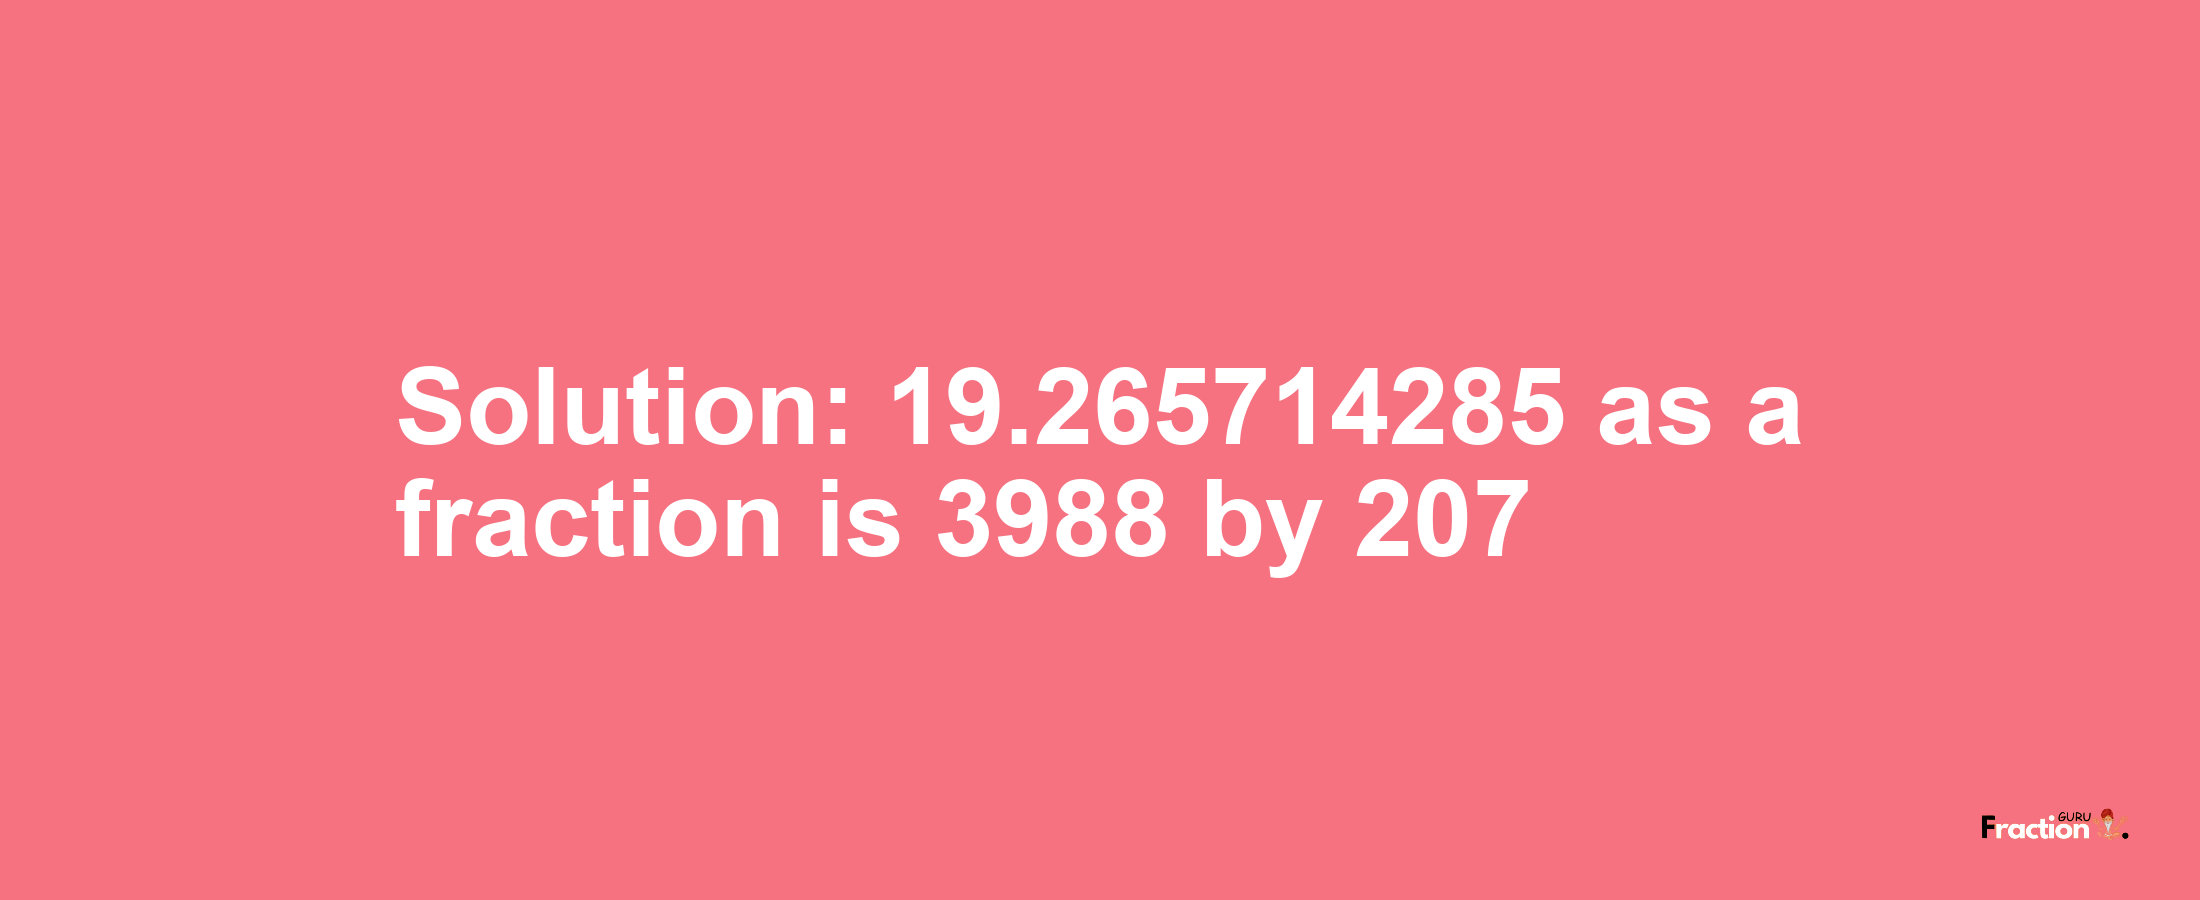 Solution:19.265714285 as a fraction is 3988/207